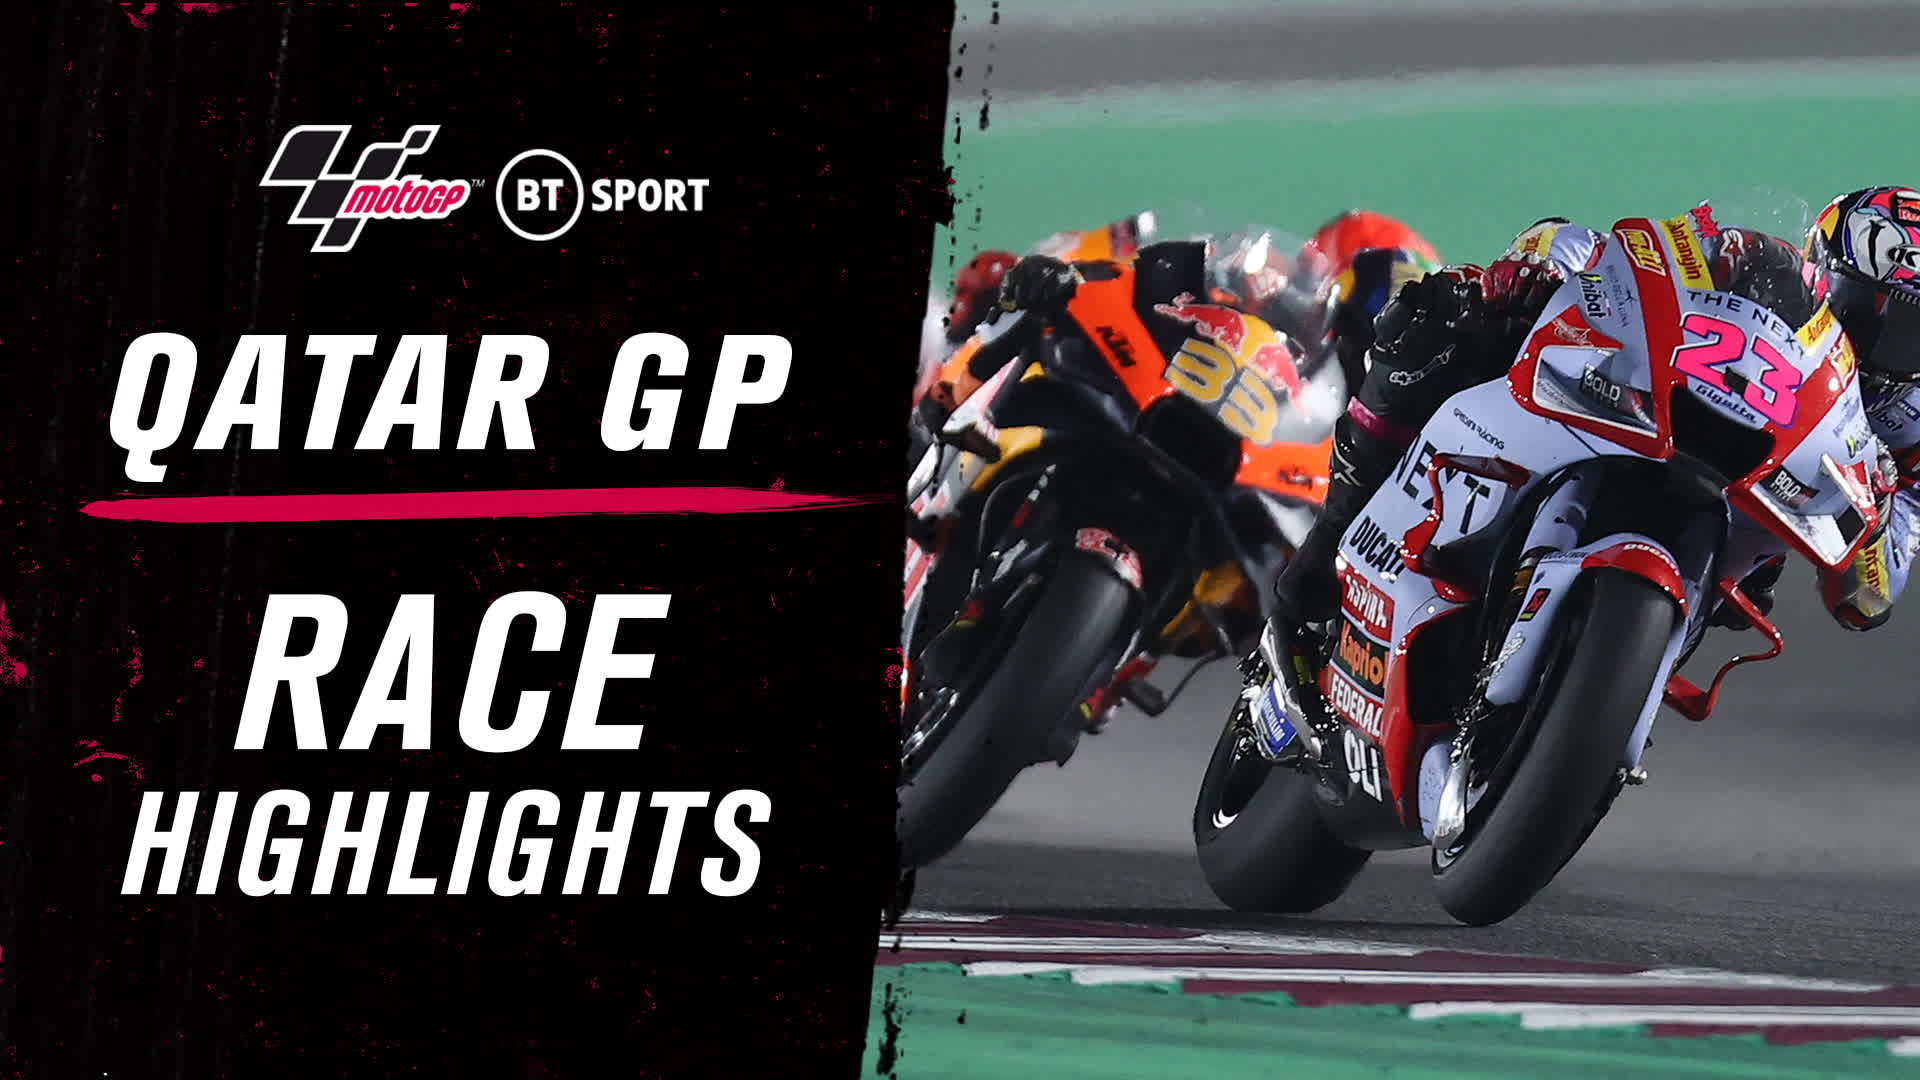 MotoGP on BT Sport on "We've missed you, MotoGP 😍 Highlights from the opening of the season 🙌 #QatarGP https://t.co/501lyVQvxB" / Twitter